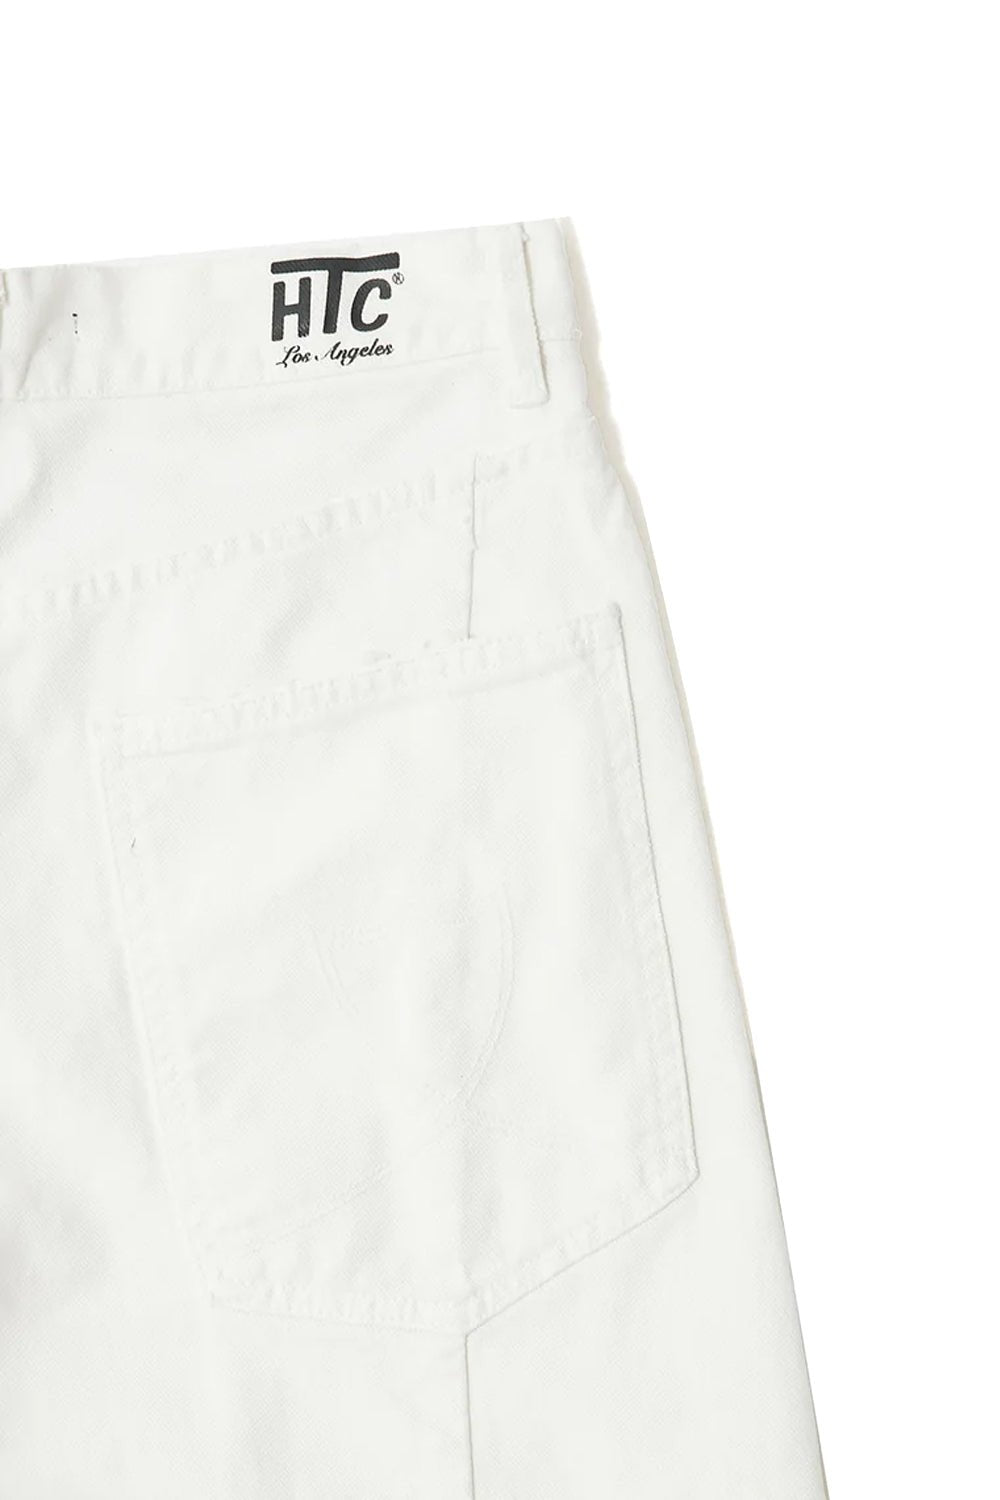 MARISSA WHITE White wide leg fit jeans, zip and button closure. 100% cotton. Made in Italy. HTC LOS ANGELES